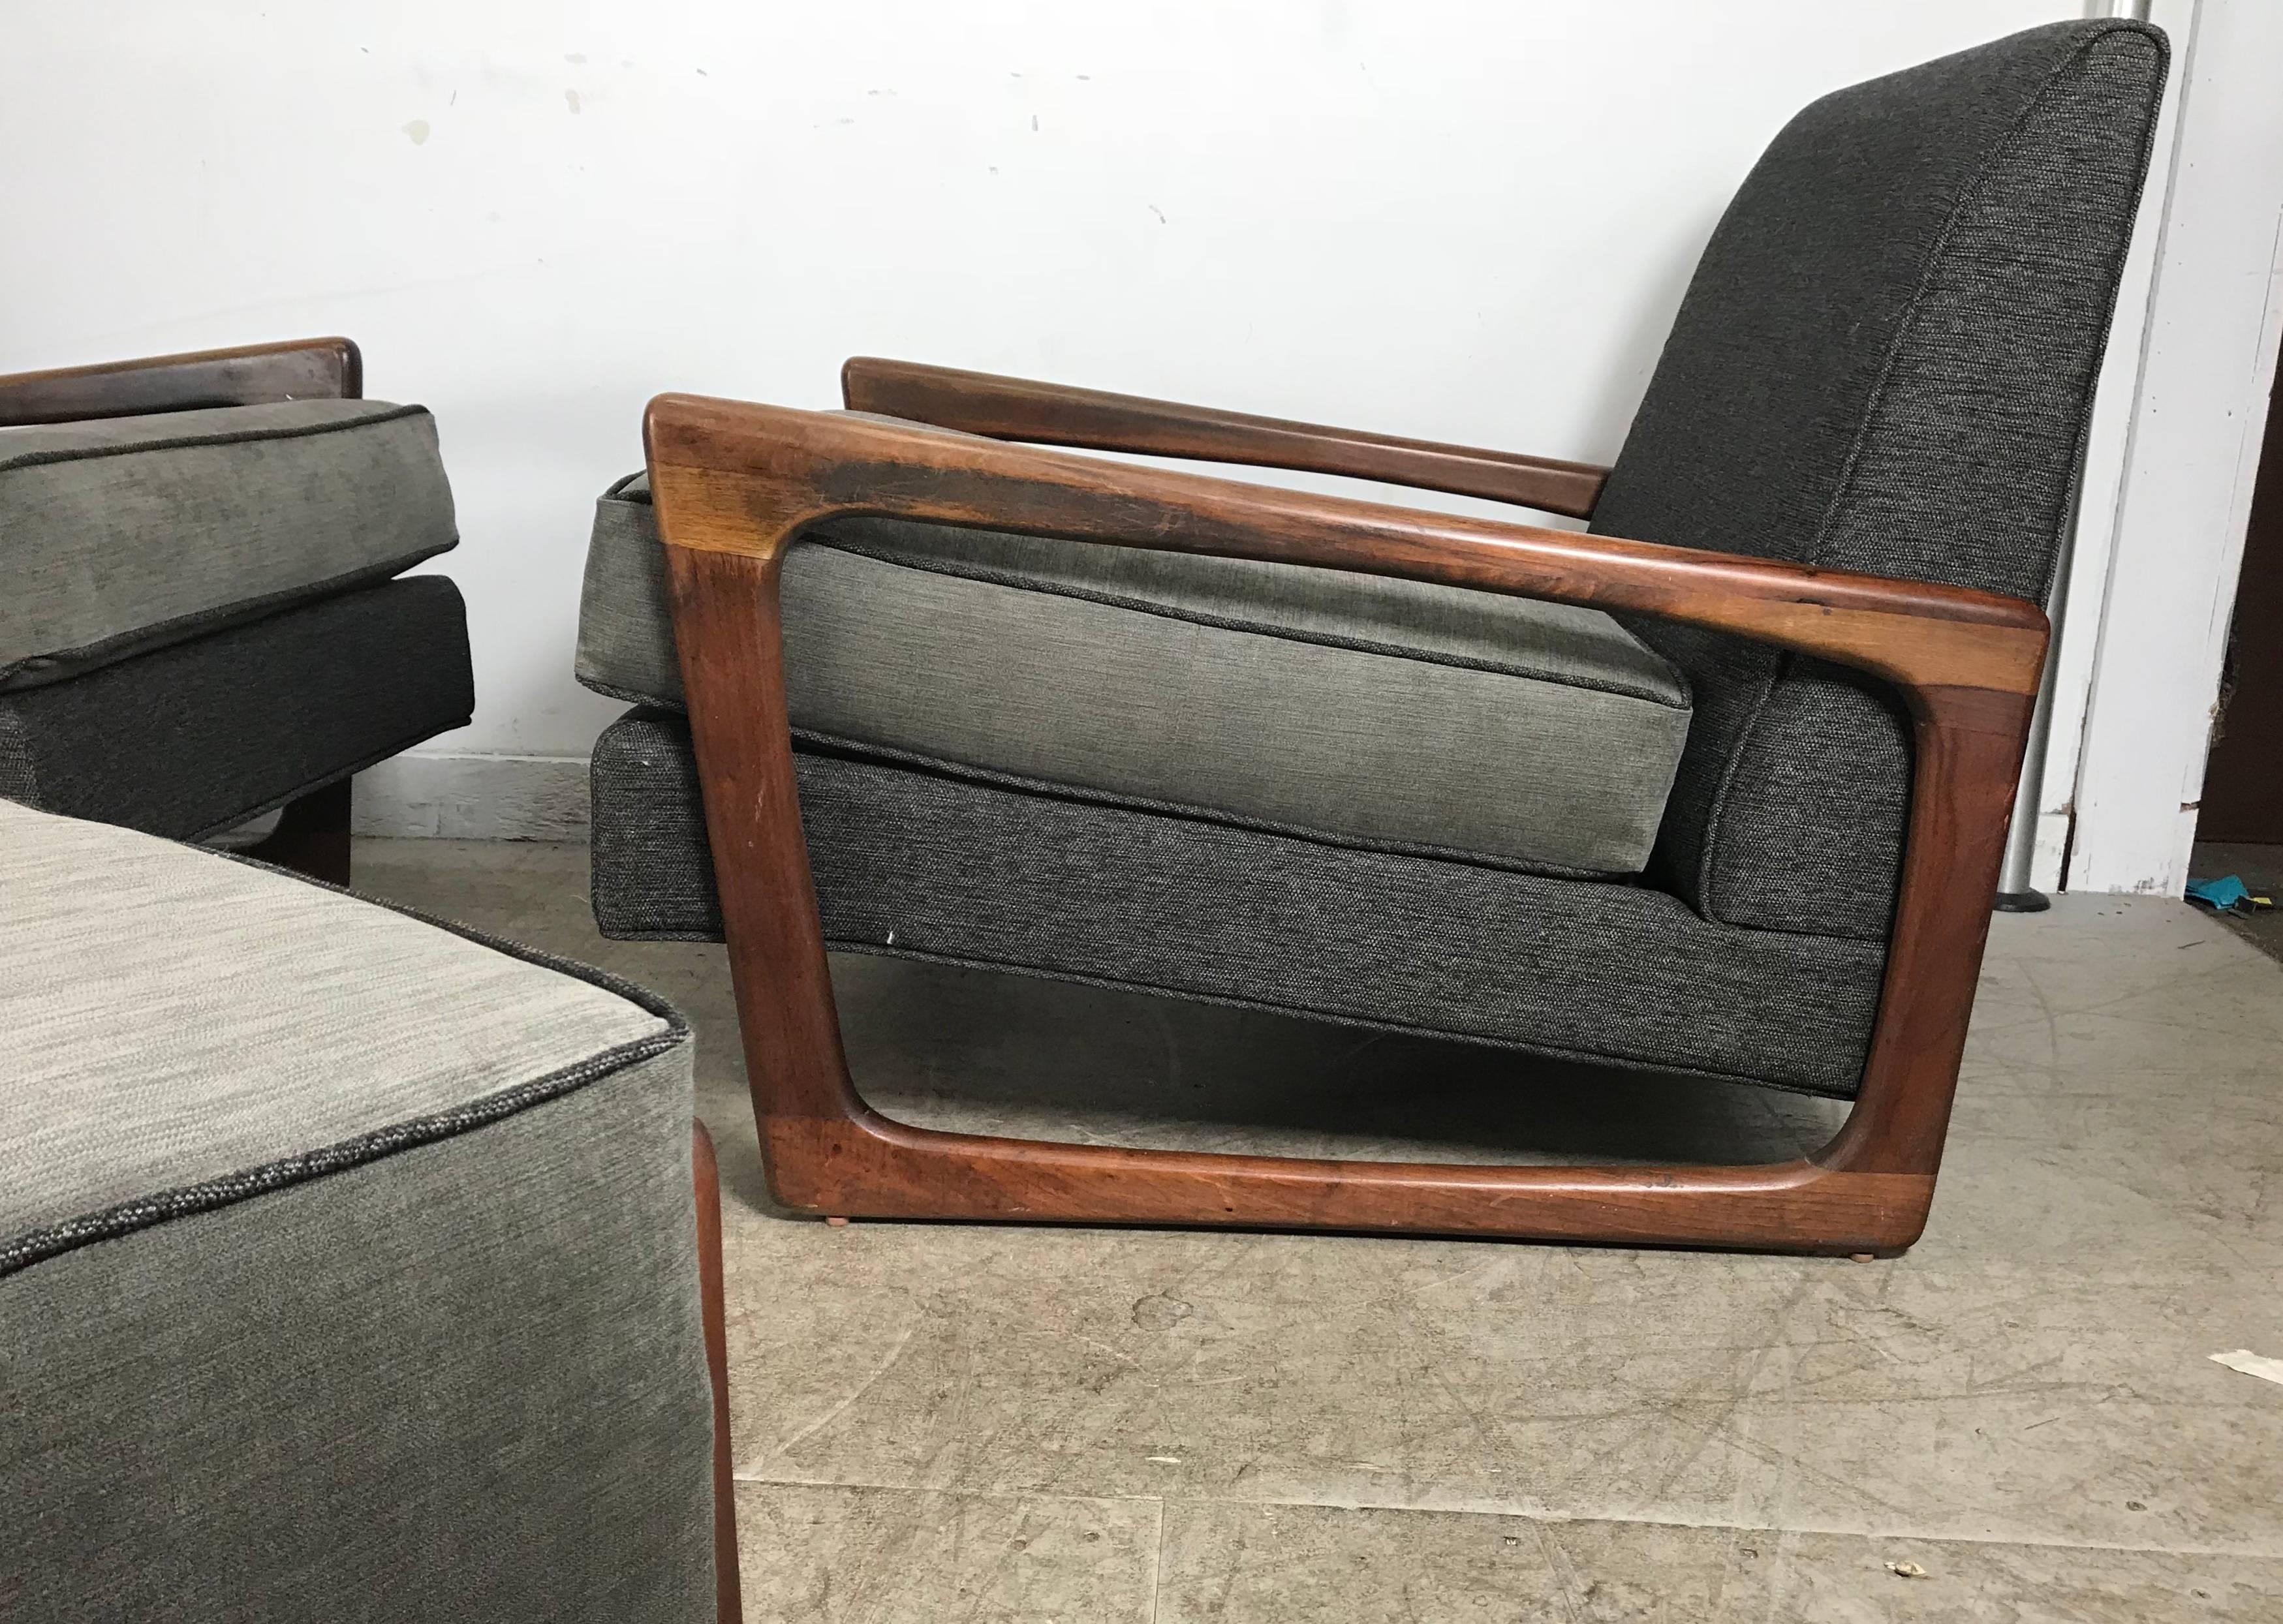 Classic Mid-Century Modern sculptural walnut low profile his and hers lounge chairs and matching ottoman designed by Adrian Pearsall for his company Craft Associates, Stunning design, as fresh today as the day they were produced, Recently